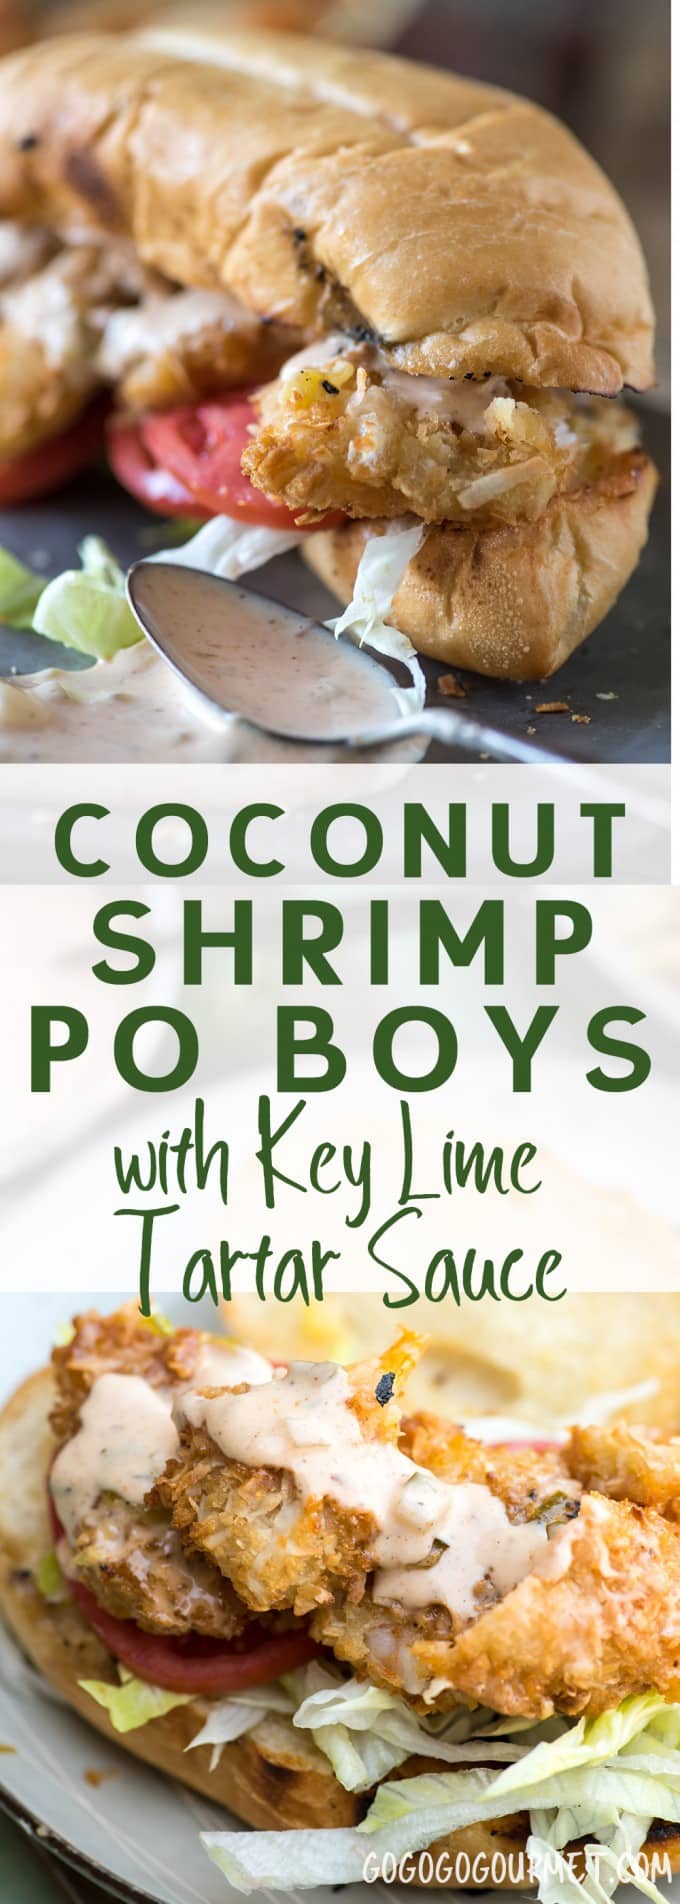 Coconut Shrimp Po Boy with Key Lime Tartar Sauce is a breeze to make using frozen coconut shrimp and an easy spicy sauce. A tropical twist on a southern staple! #gogogogourmet #coconutshrimppoboy #poboysandwich via @gogogogourmet